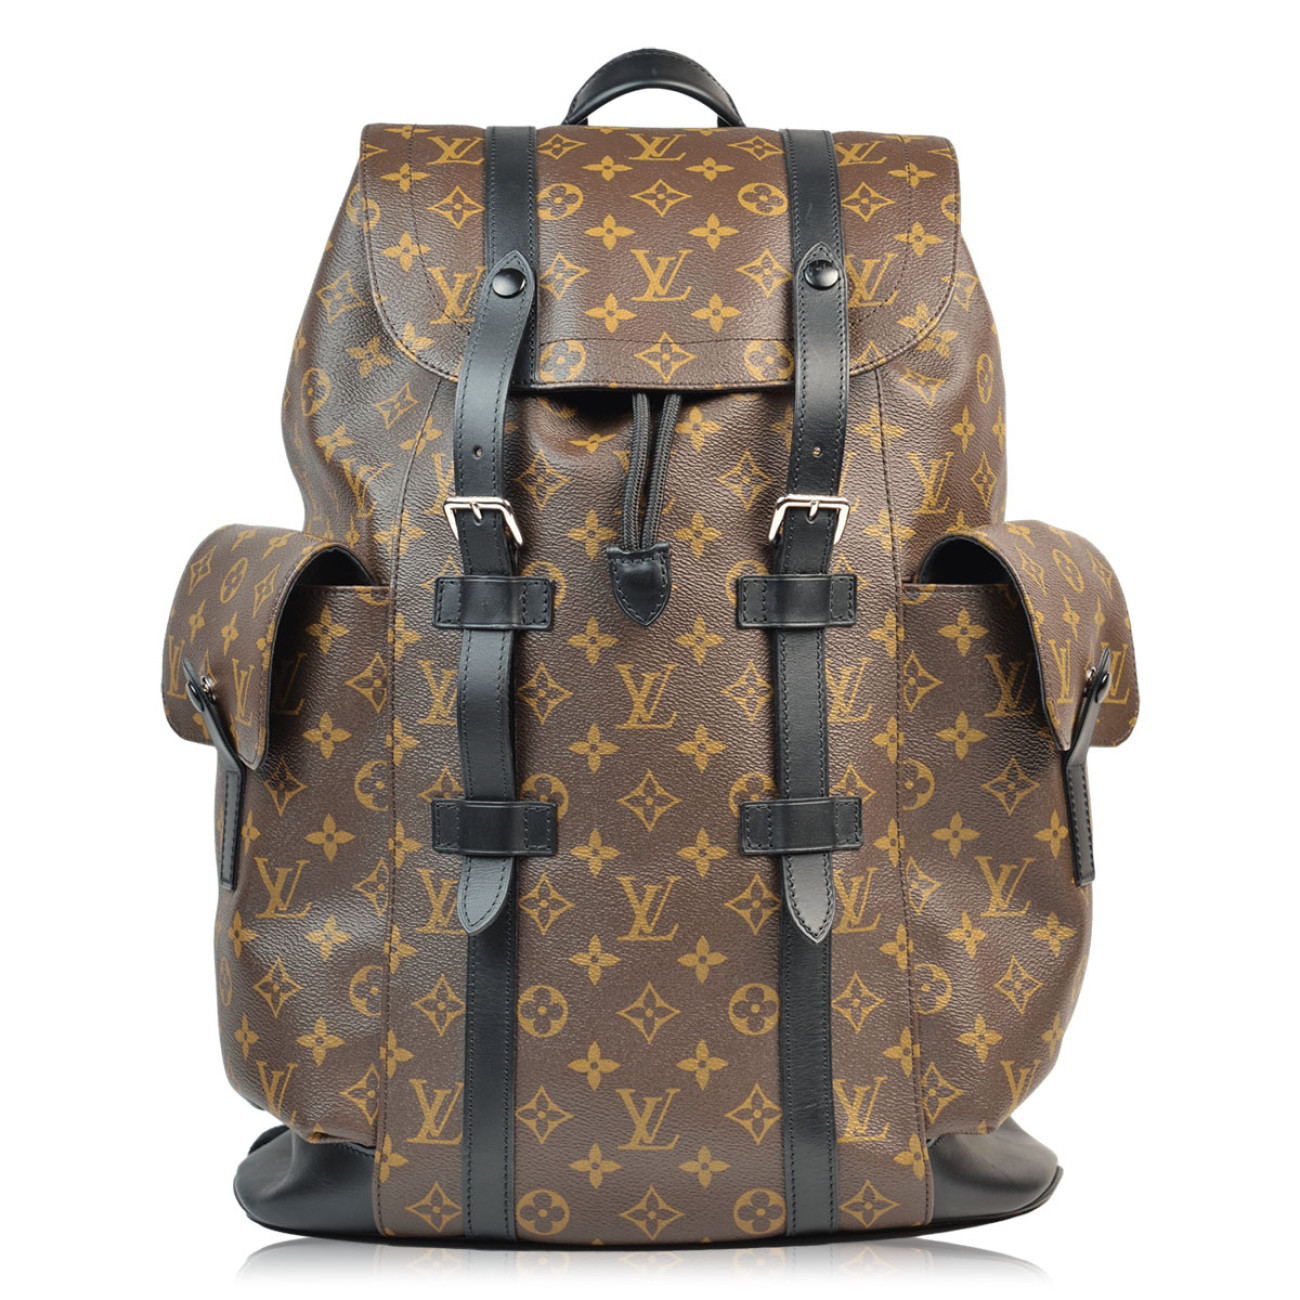 How much does a Louis Vuitton backpack cost? Where can I buy one